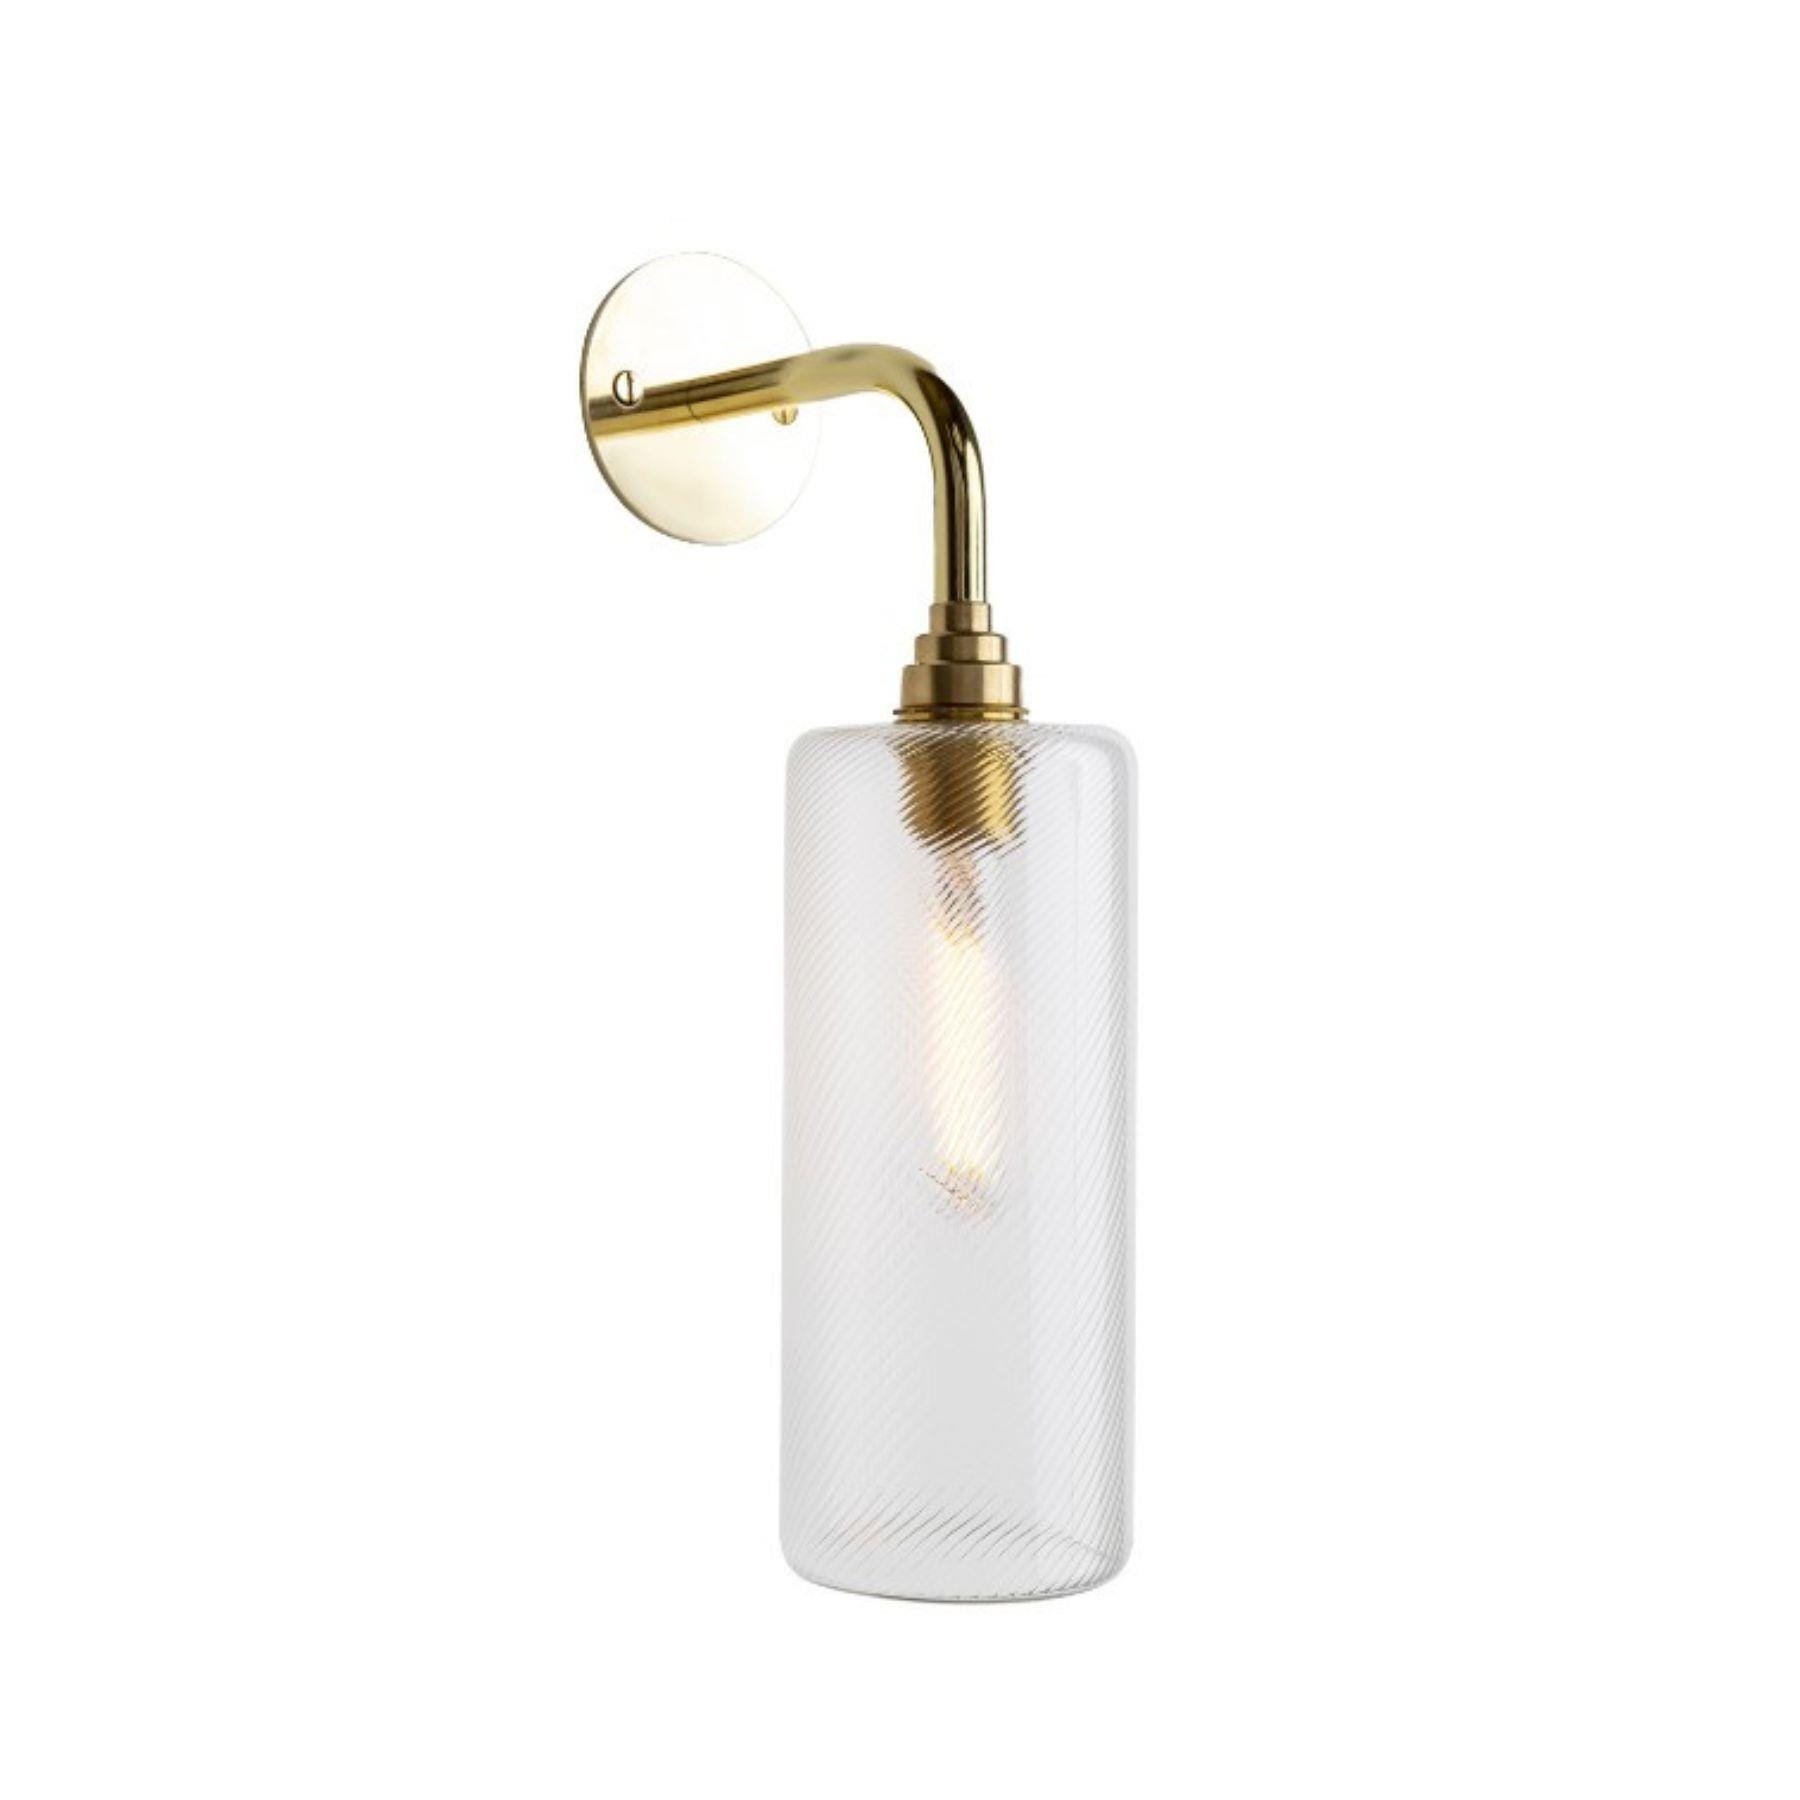 Leverint Piccadilly Wall Light Mini Yellow Wall Lighting